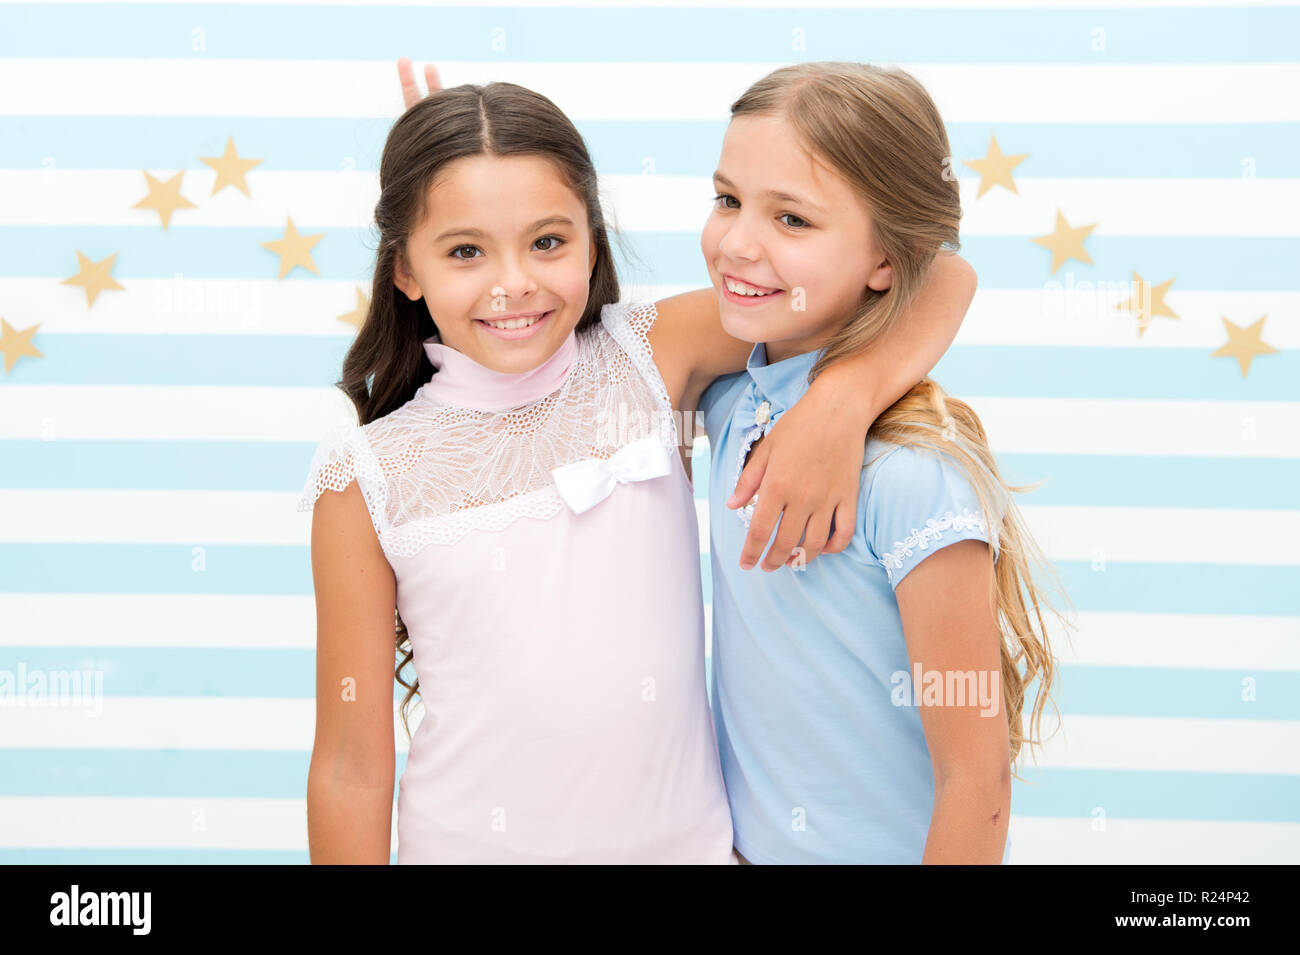 Girls children best friends hugs. Happy childhood concept. Kids schoolgirls preteens happy together. Friendship from childhood. Girls smiling happy faces hug each other while stand striped background. Stock Photo